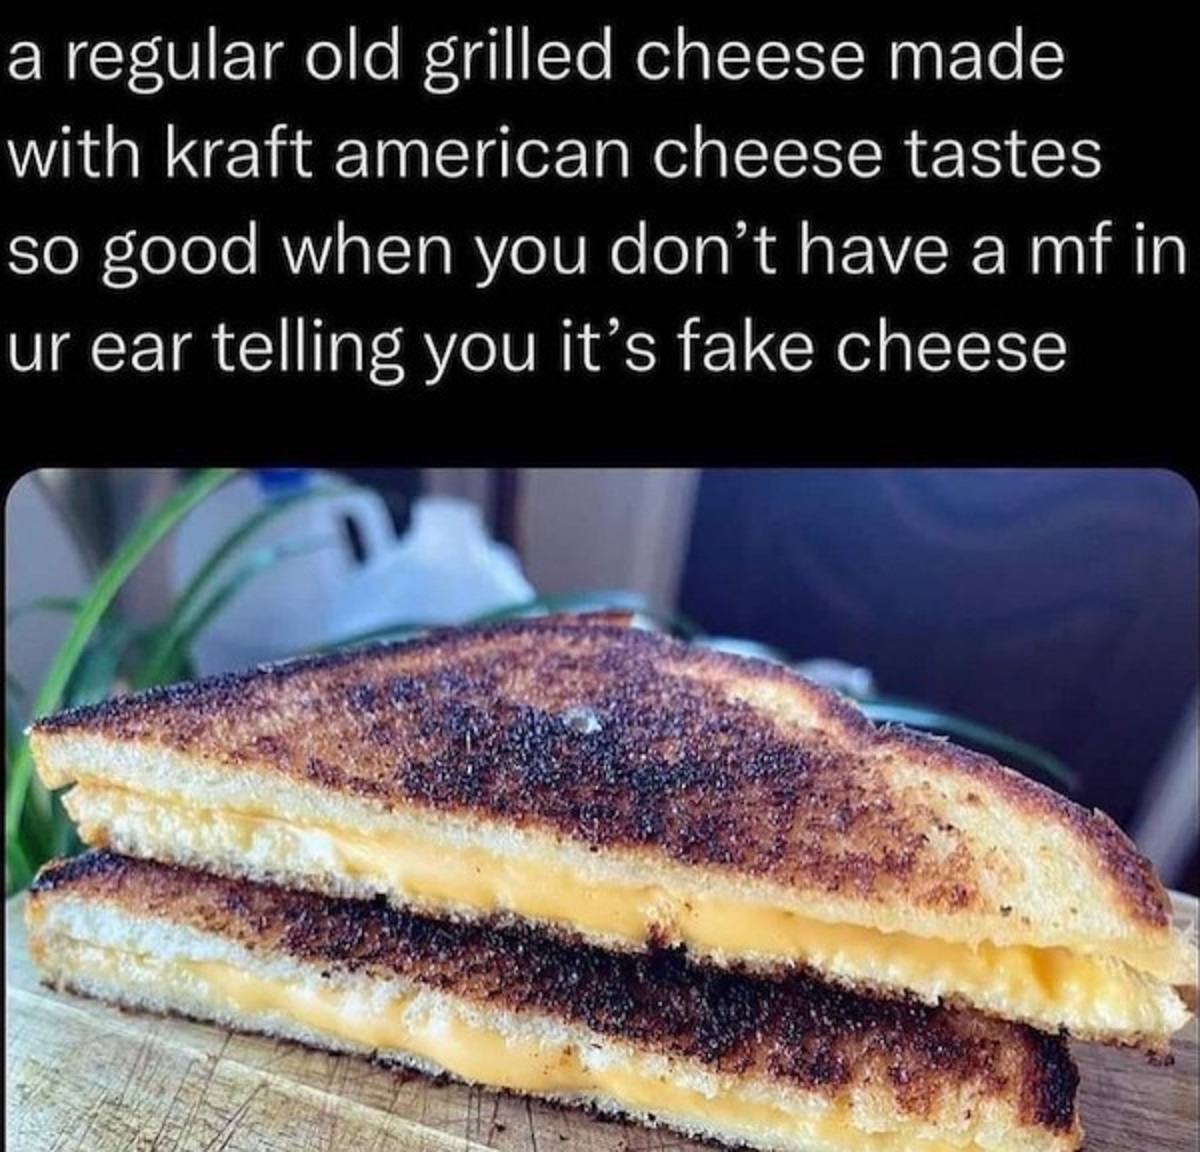 toast - a regular old grilled cheese made with kraft american cheese tastes so good when you don't have a mf in ur ear telling you it's fake cheese